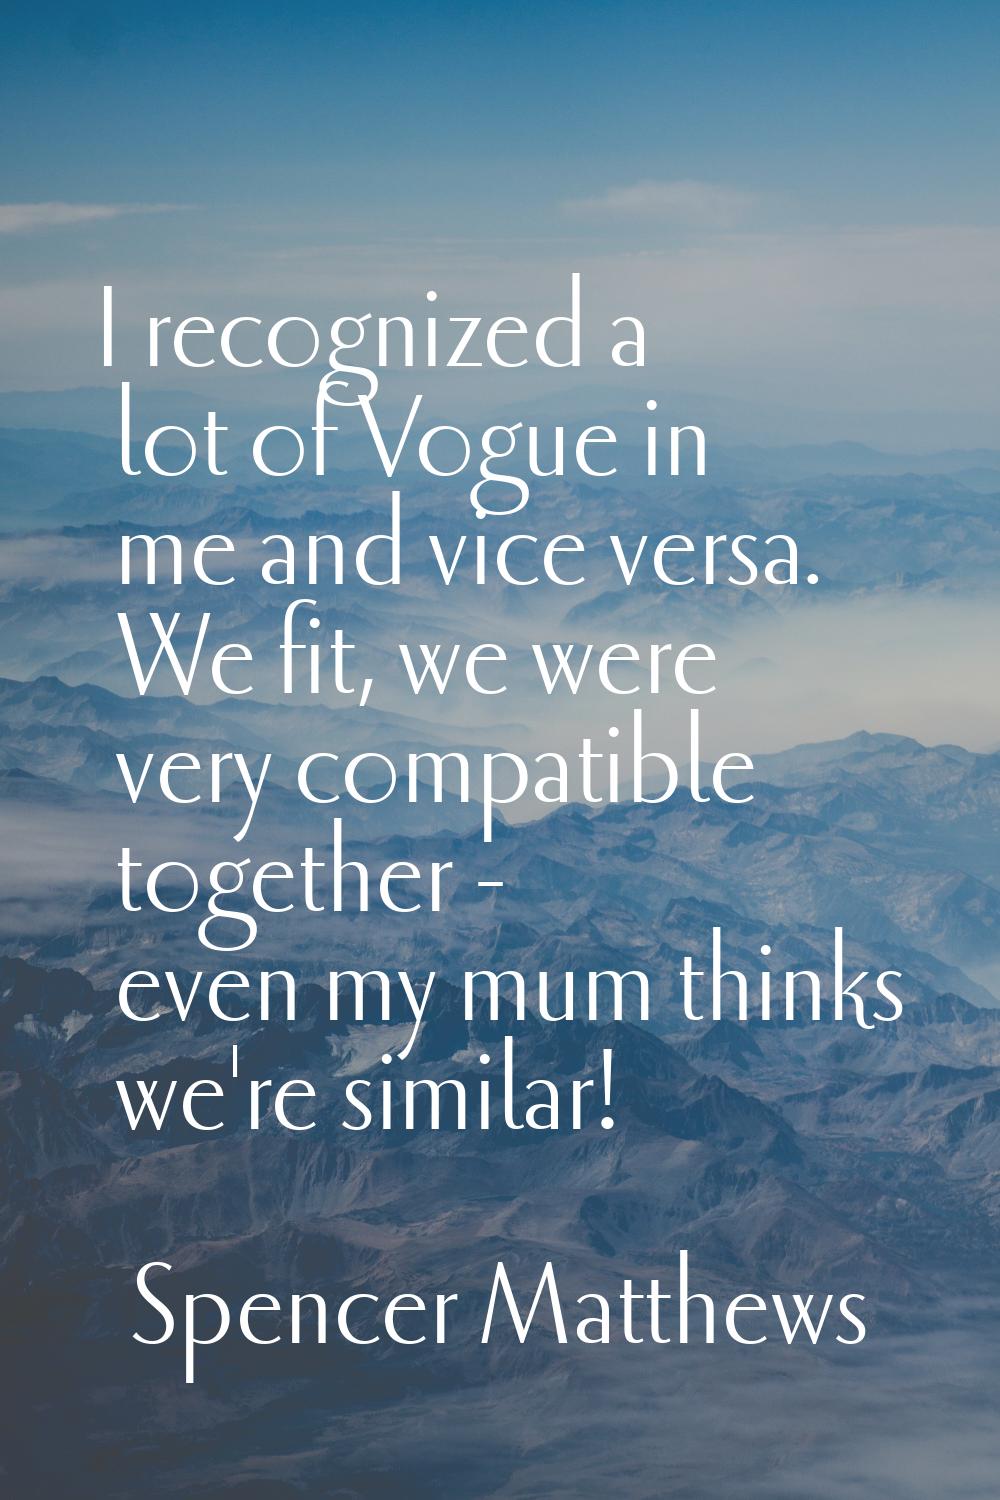 I recognized a lot of Vogue in me and vice versa. We fit, we were very compatible together - even m